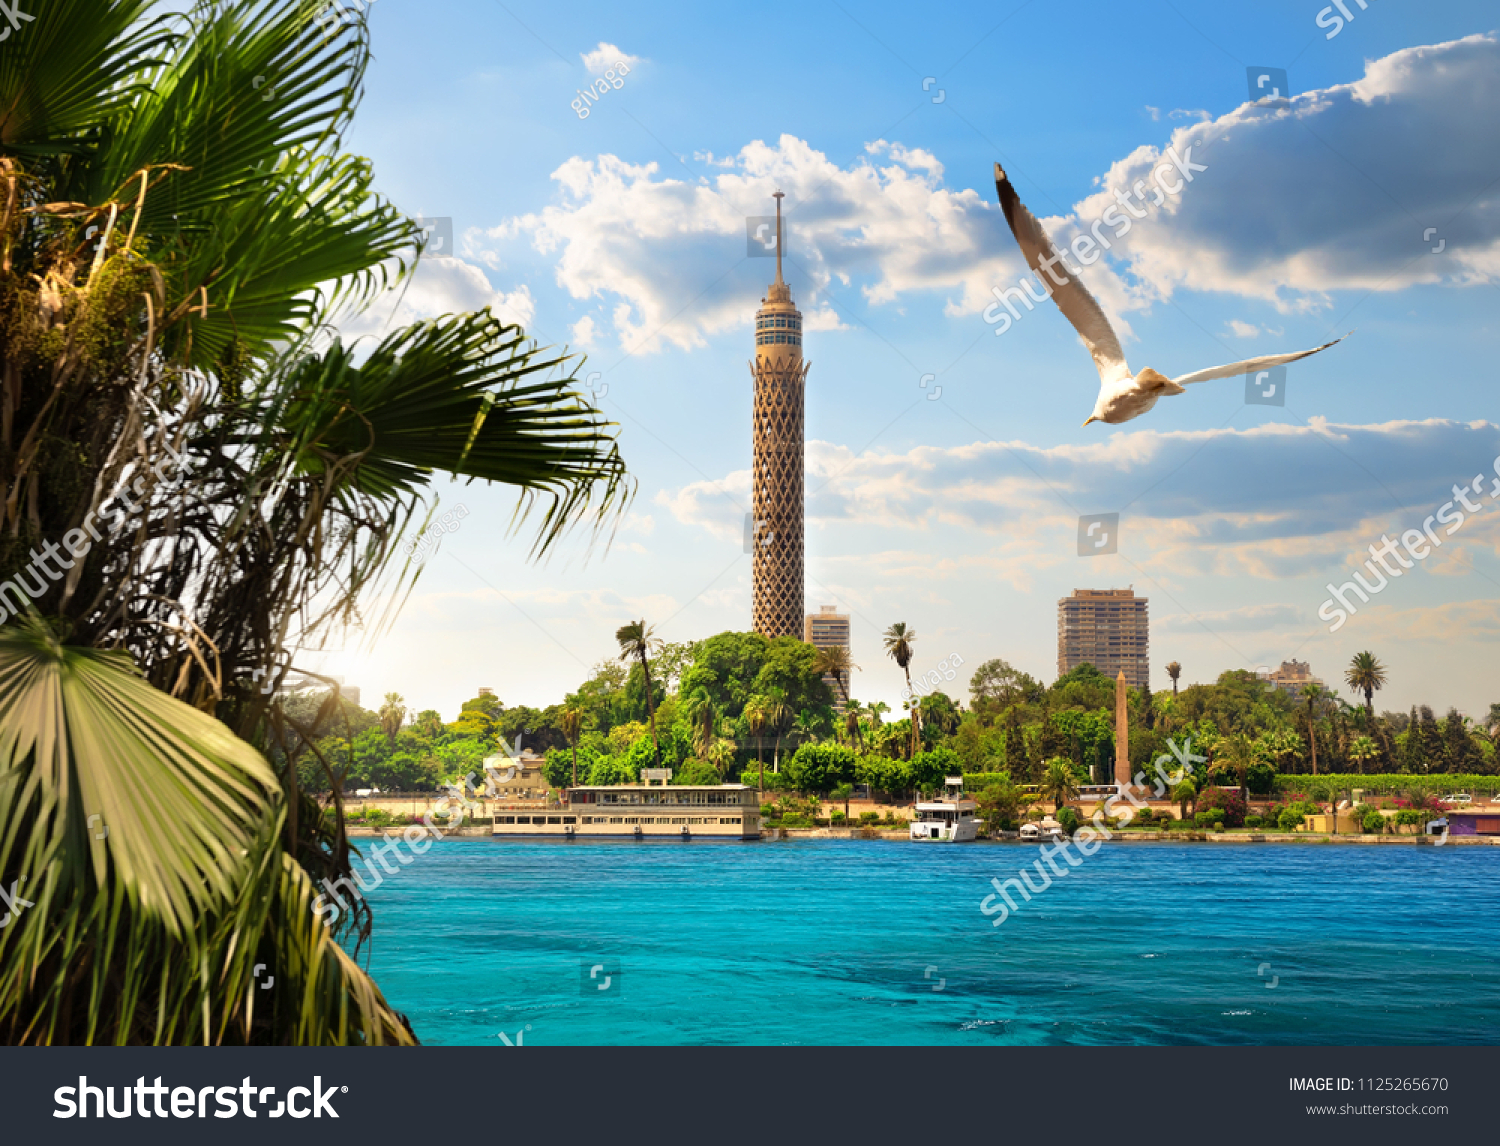 TV tower near Nile in Cairo at sunlight #1125265670